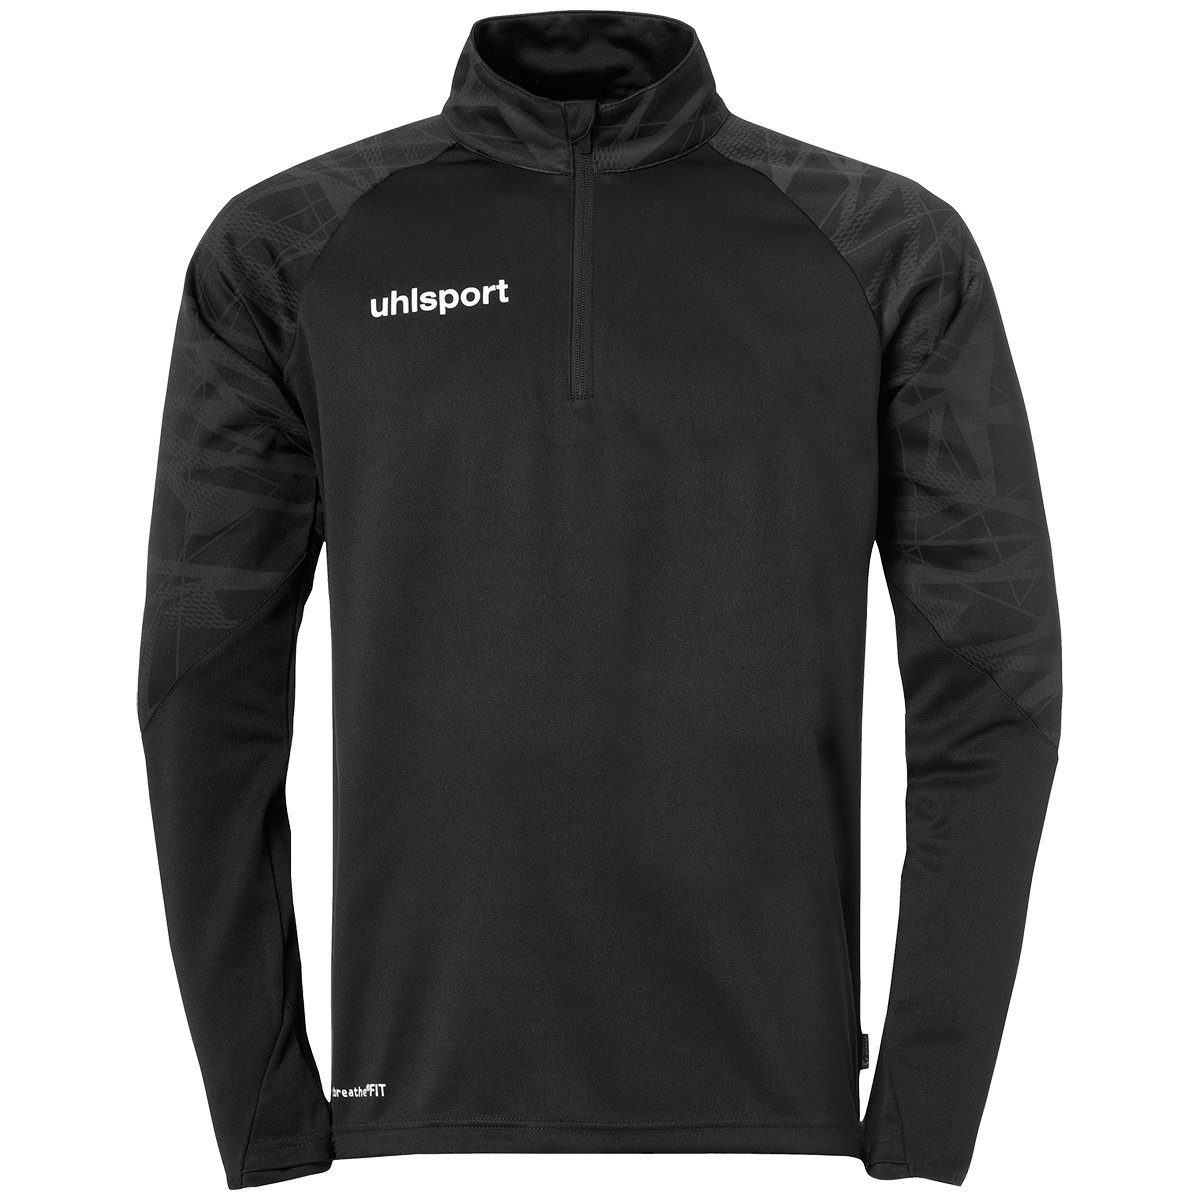 uhlsport Langarmshirt uhlsport Langarmshirt GOAL 25 1/4 ZIP TOP,  Hergestellt aus recyceltem Polyester ( "FOR THE PLANET")